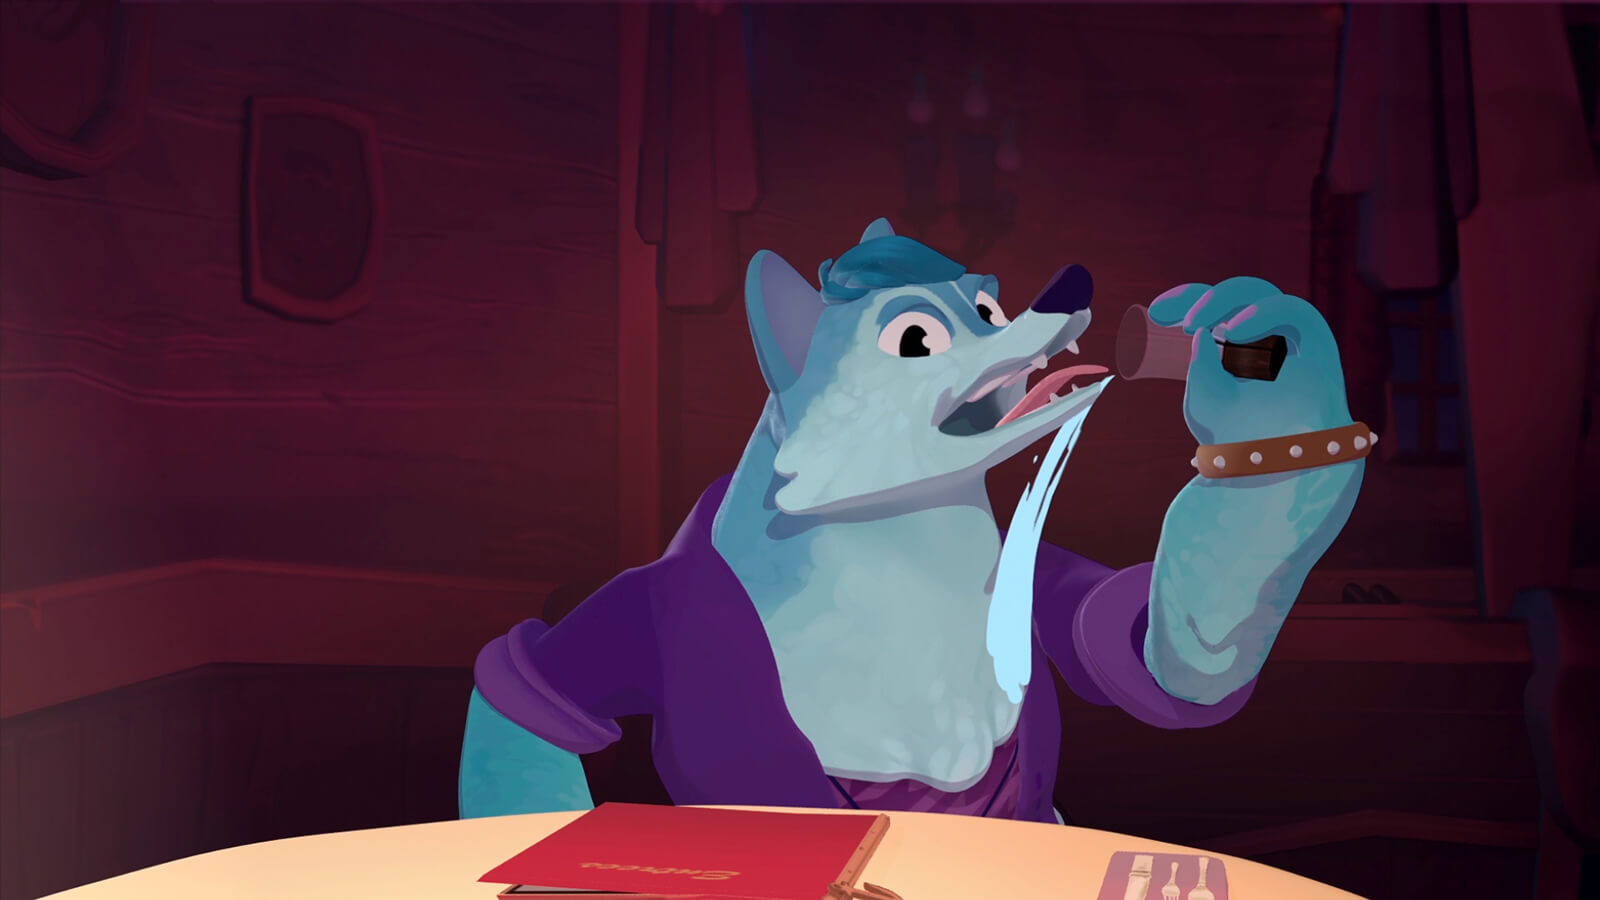 A blue werewolf sitting at a table moves a cup to its face, but the water misses its mouth and spills on its chest